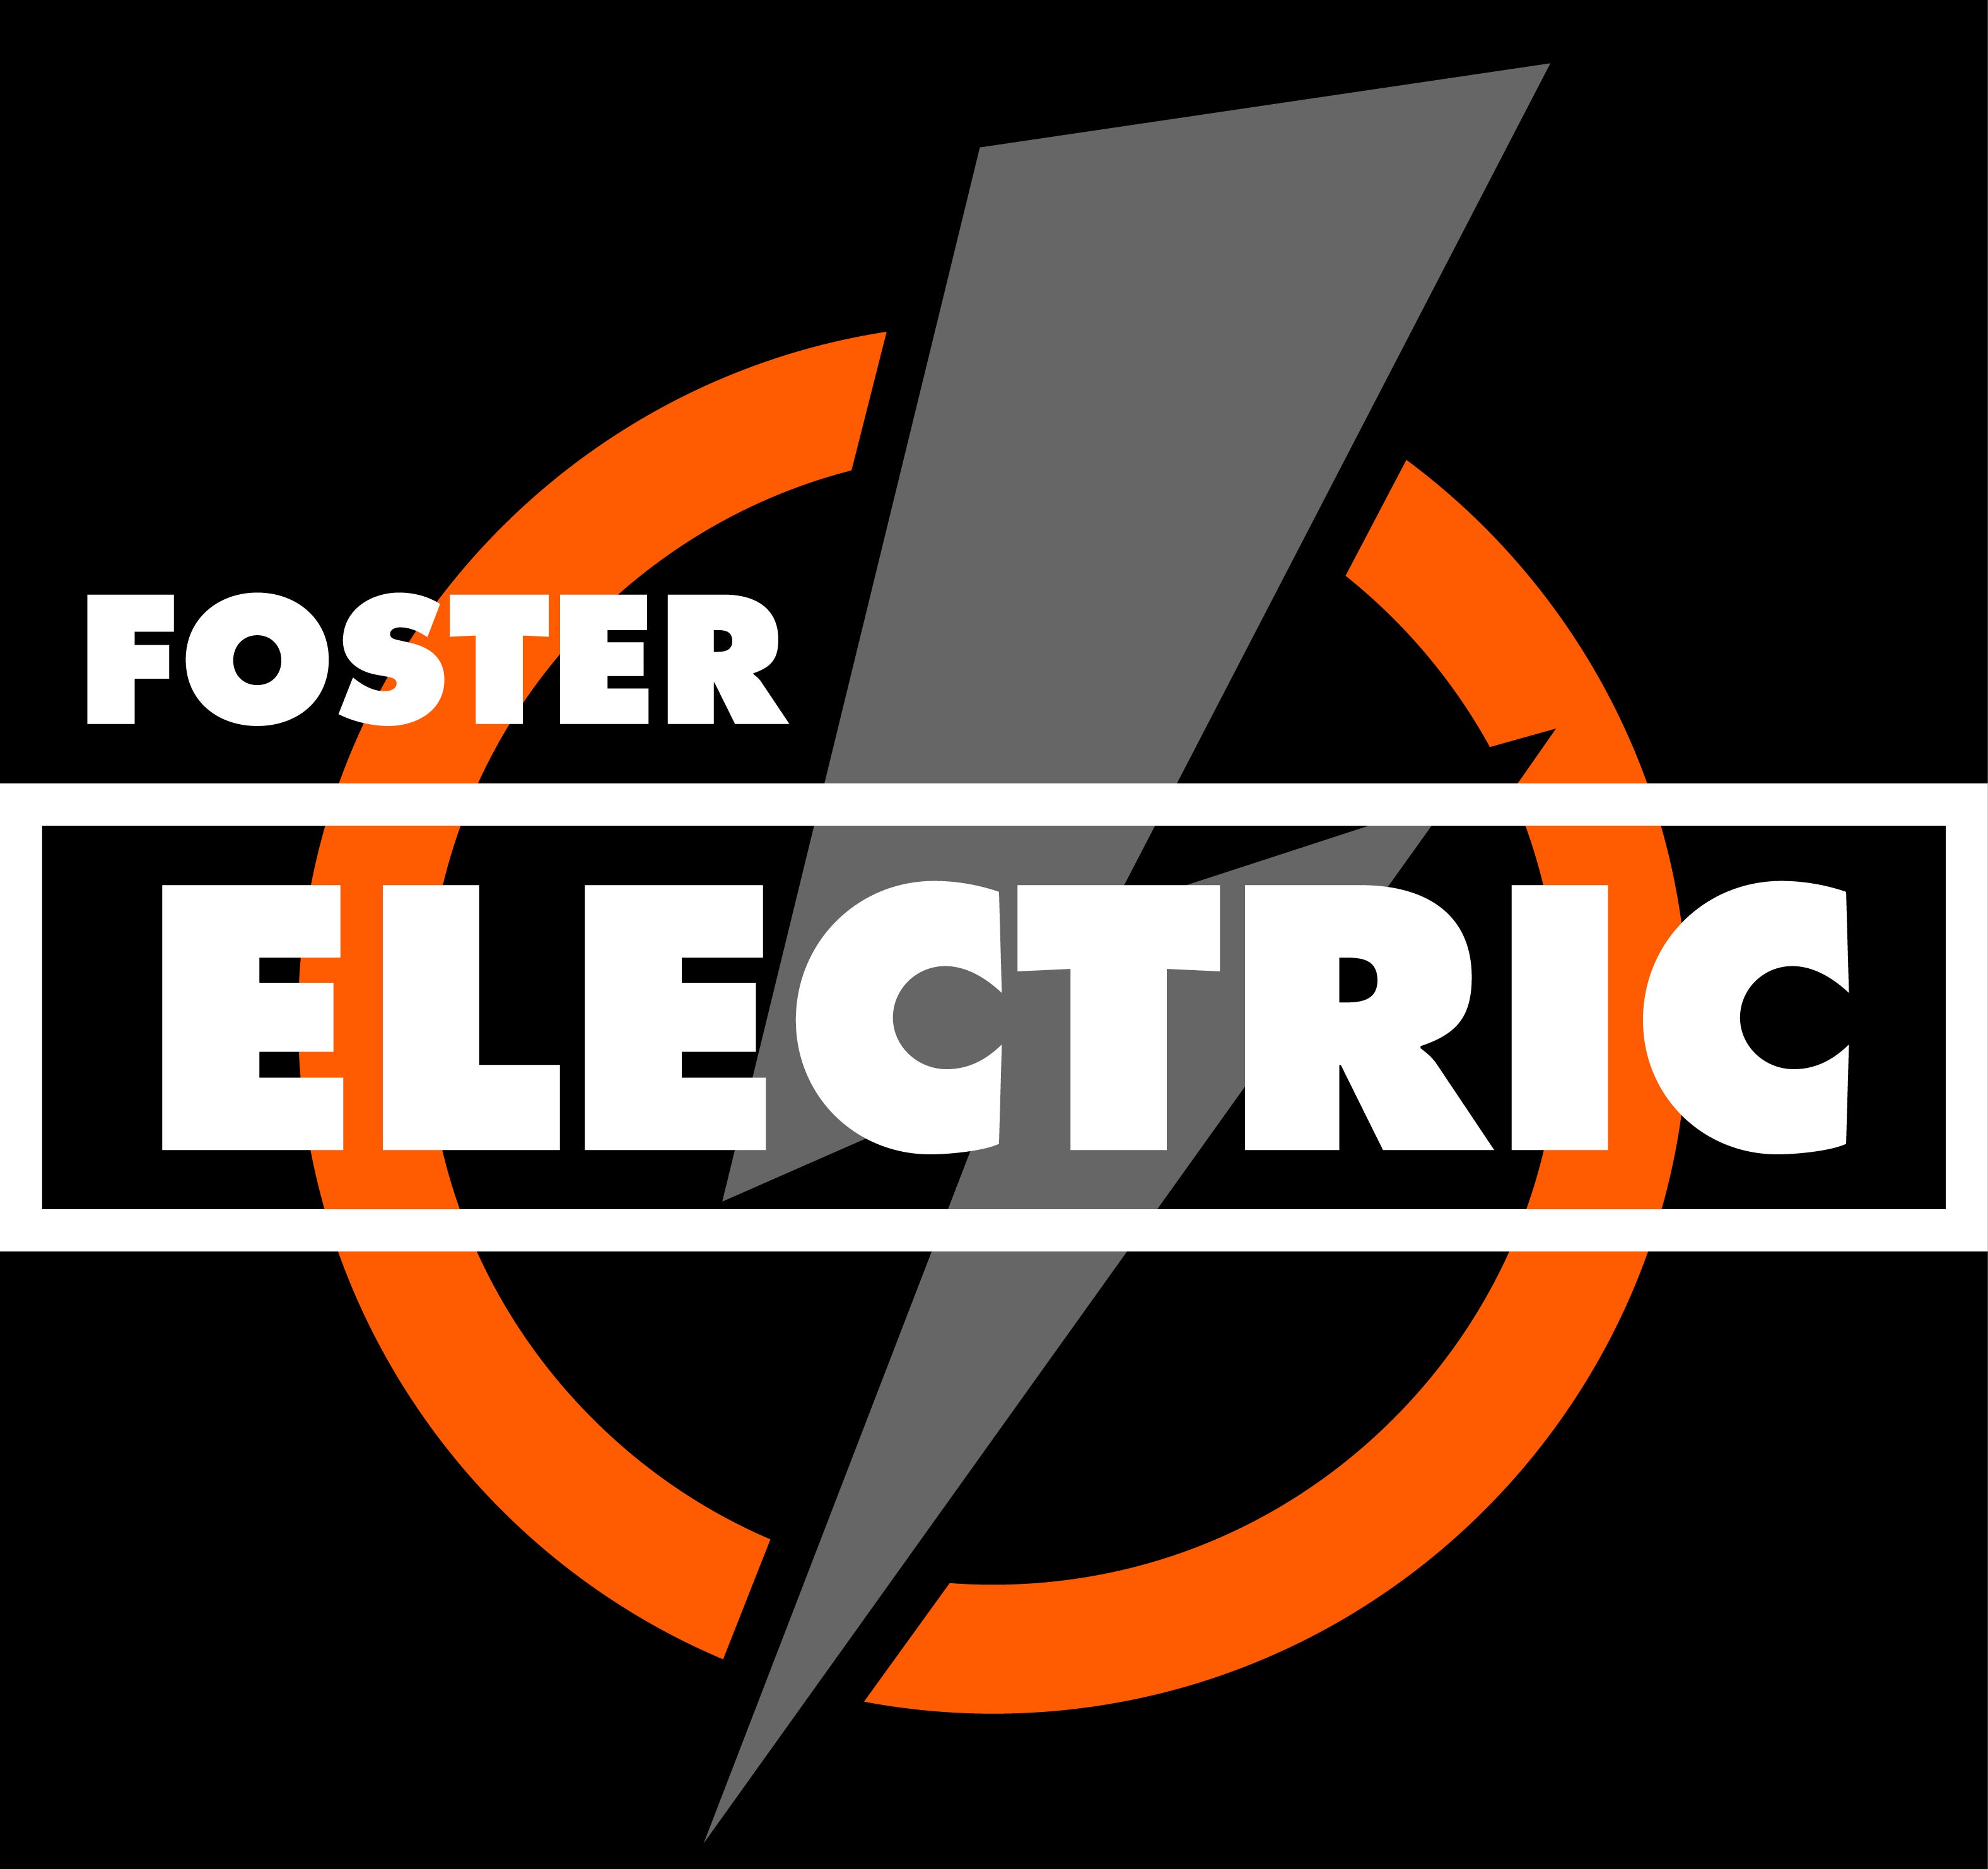 Foster Electric logo